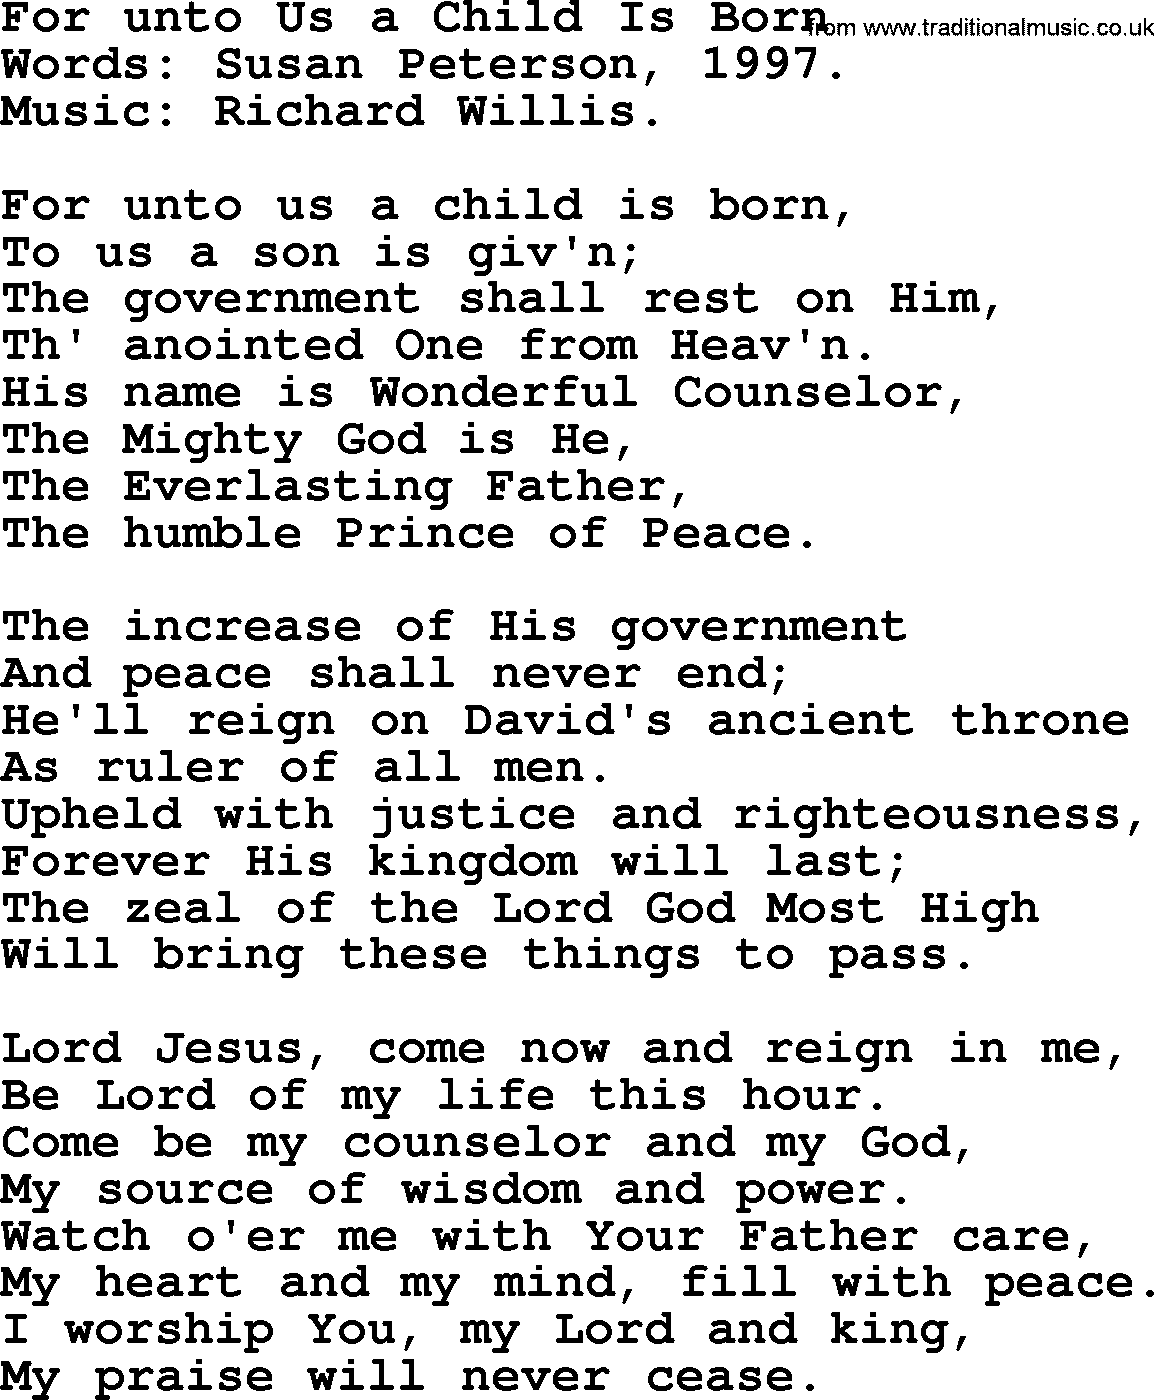 Christmas Hymns, Carols and Songs, title: For Unto Us A Child Is Born - complete lyrics, and PDF